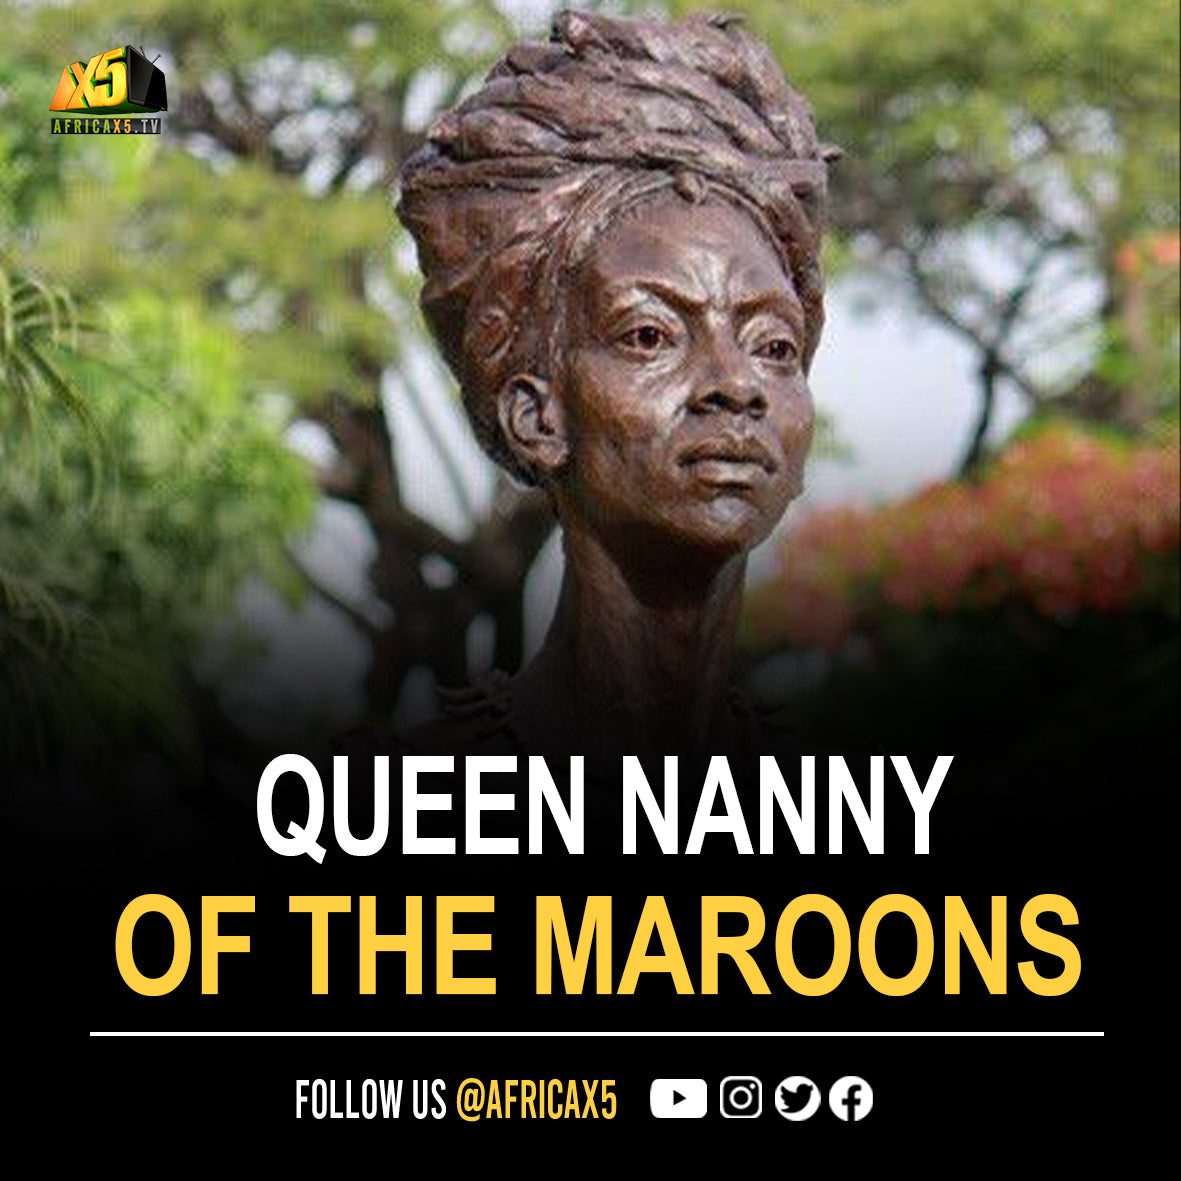 Queen Nanny Of The Maroons: Ashanti Woman who Fought And Freed Over 1,000 Enslaved Africans In Jamaica.